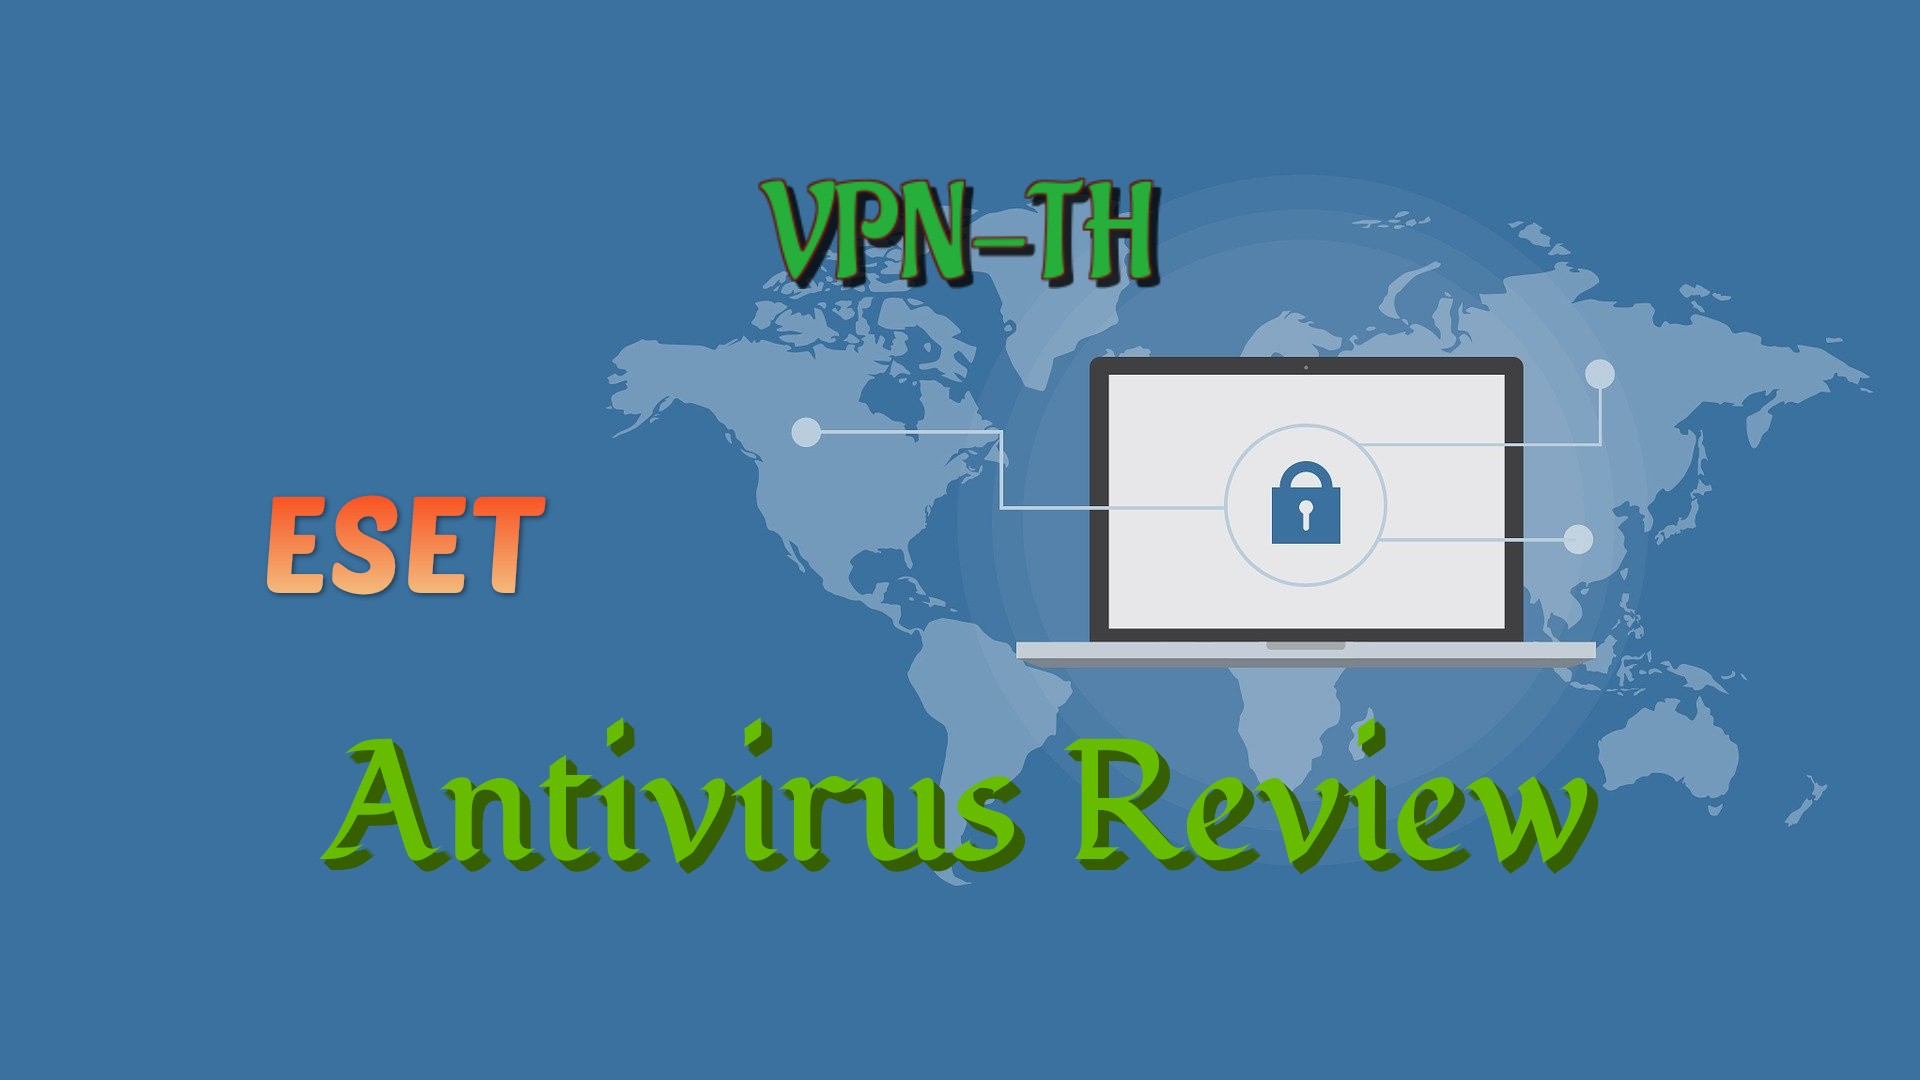 ESET Antivirus - Pros and Cons in This Detailed Review